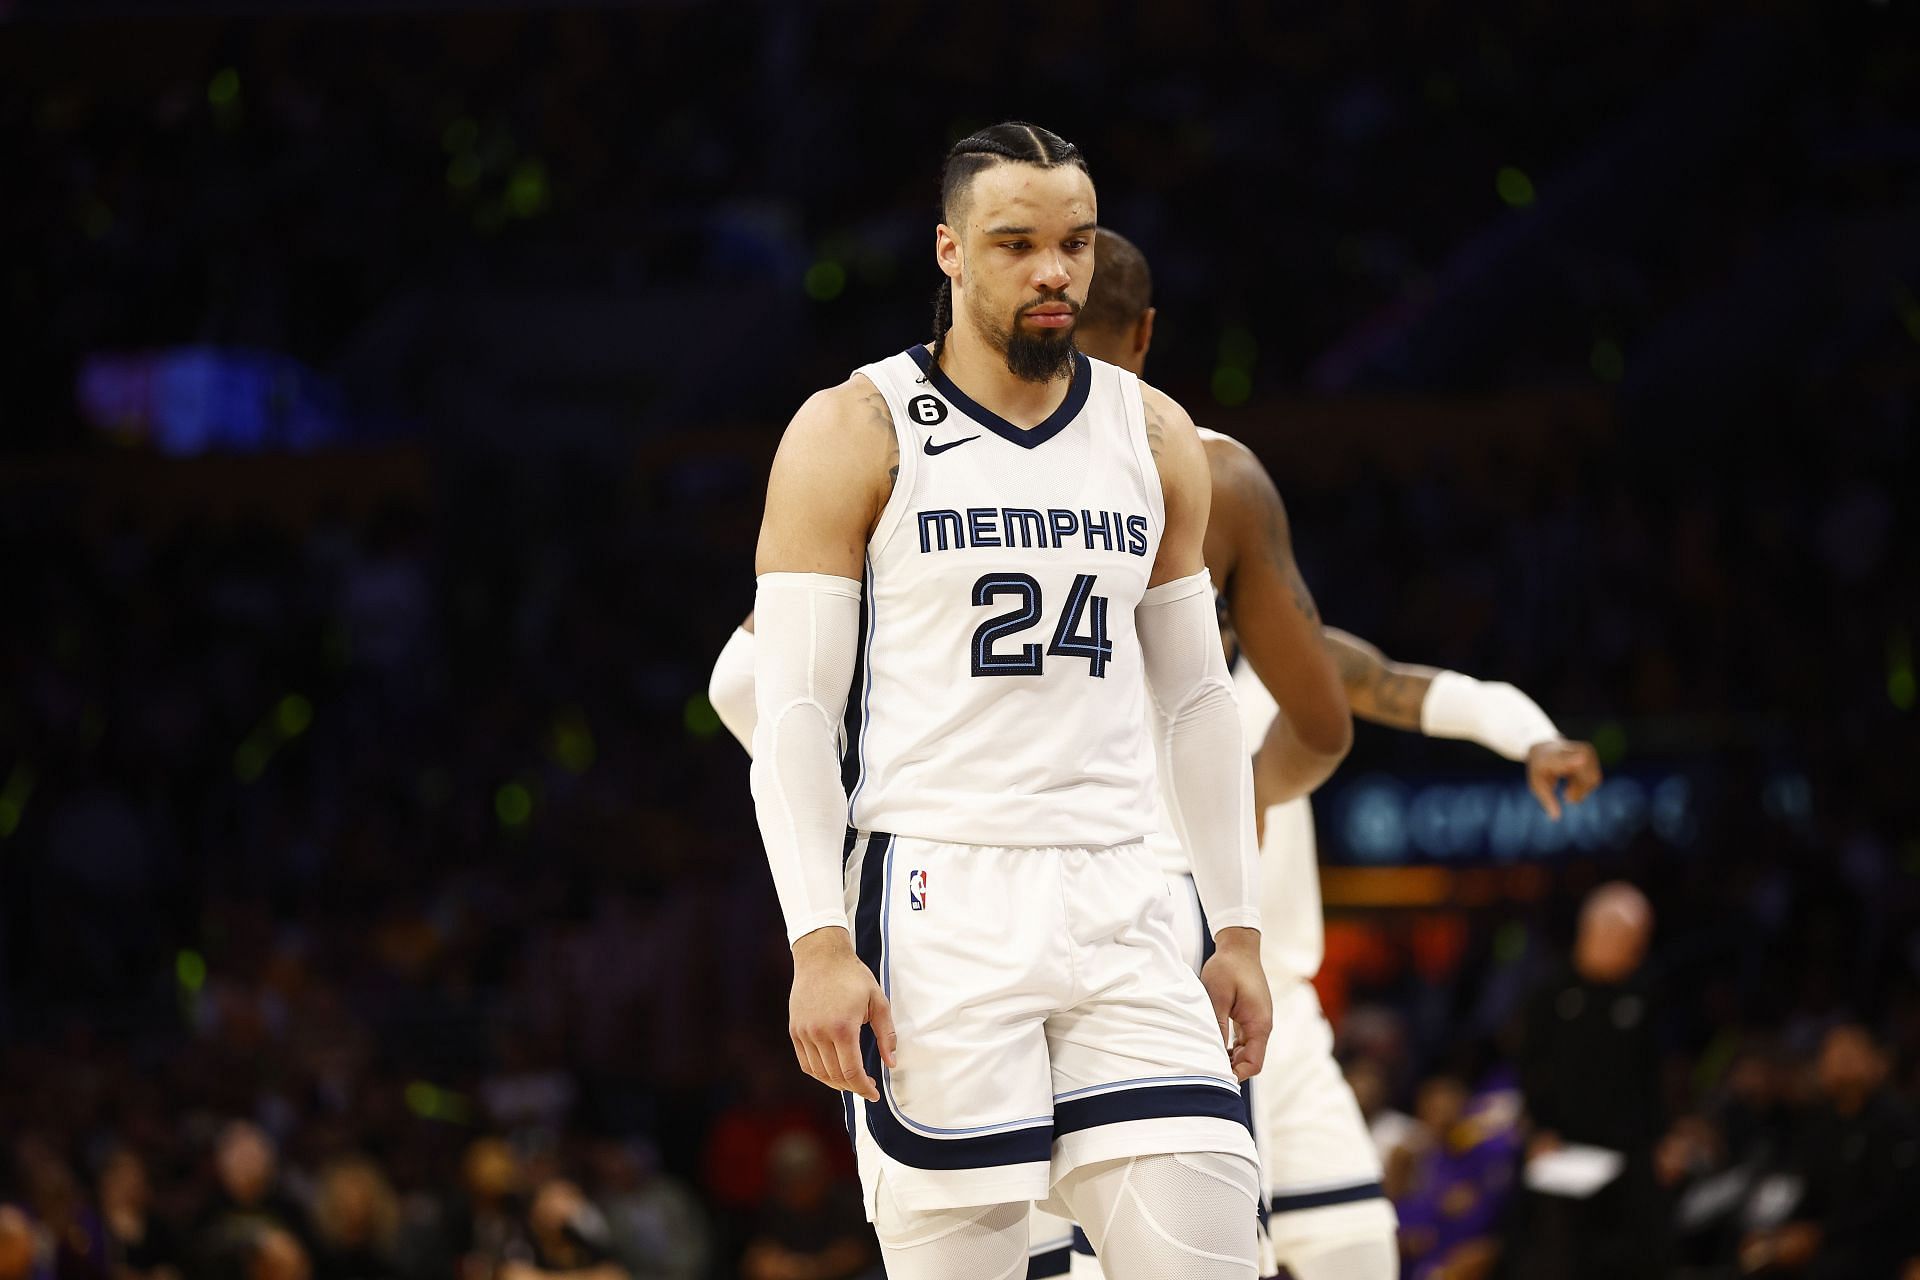 Dillon Brooks scoring 20 has equaled a Grizzlies win